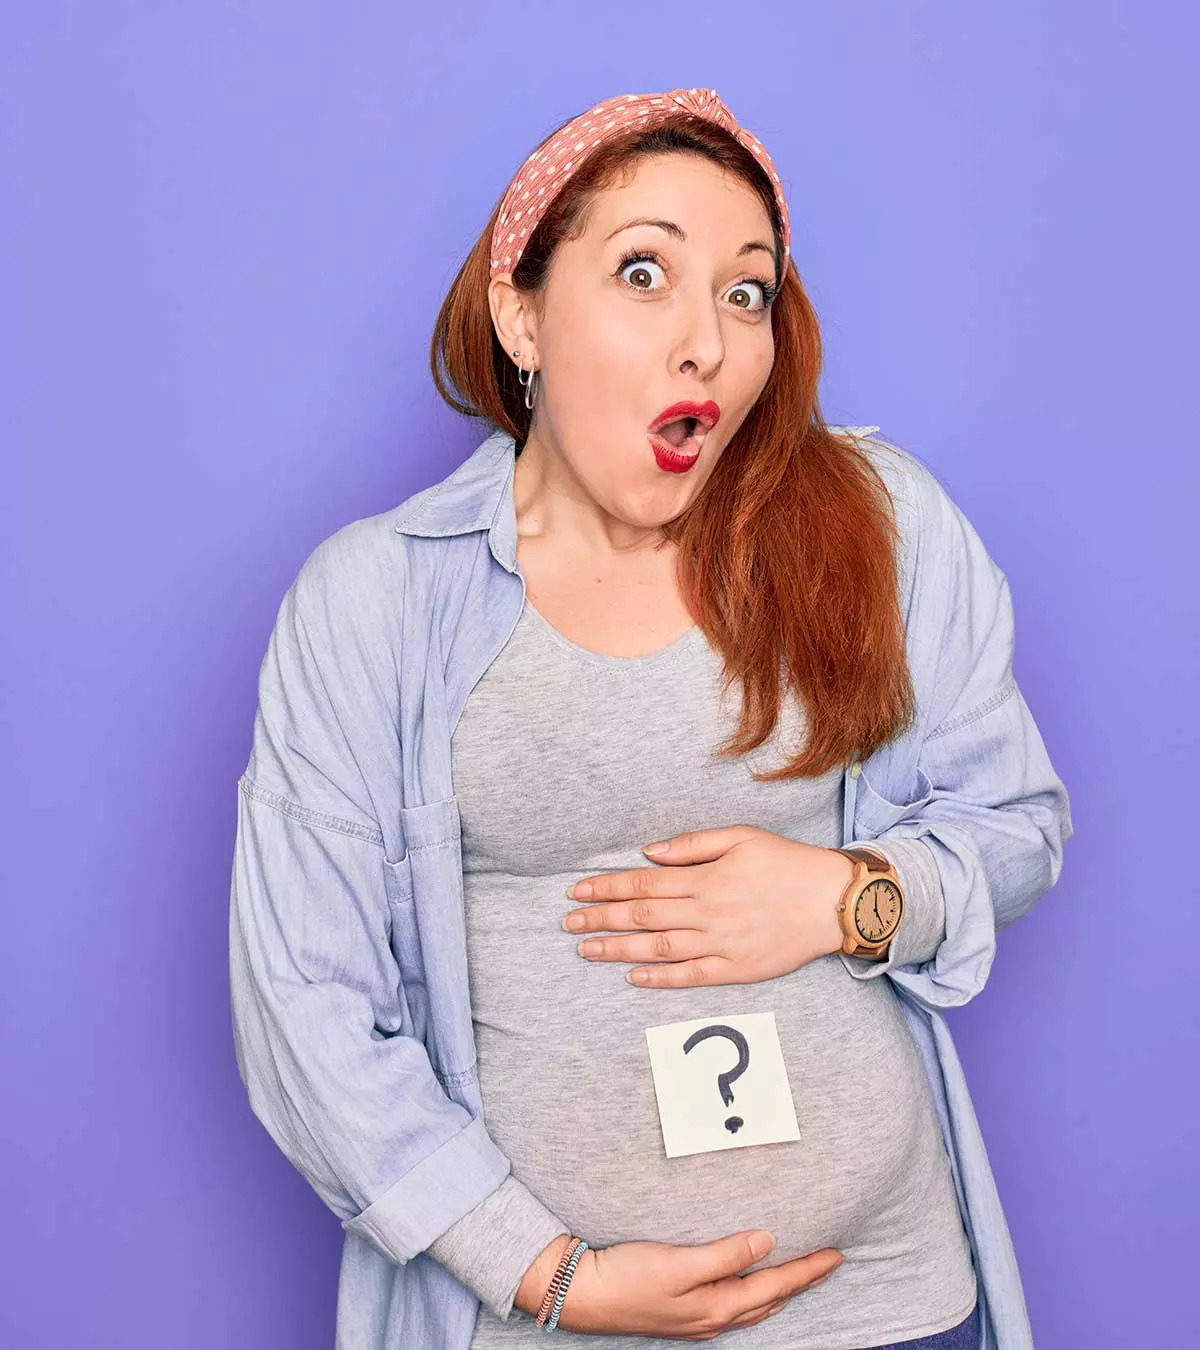 6 Myths About Pregnancy That Turned Out To Be True